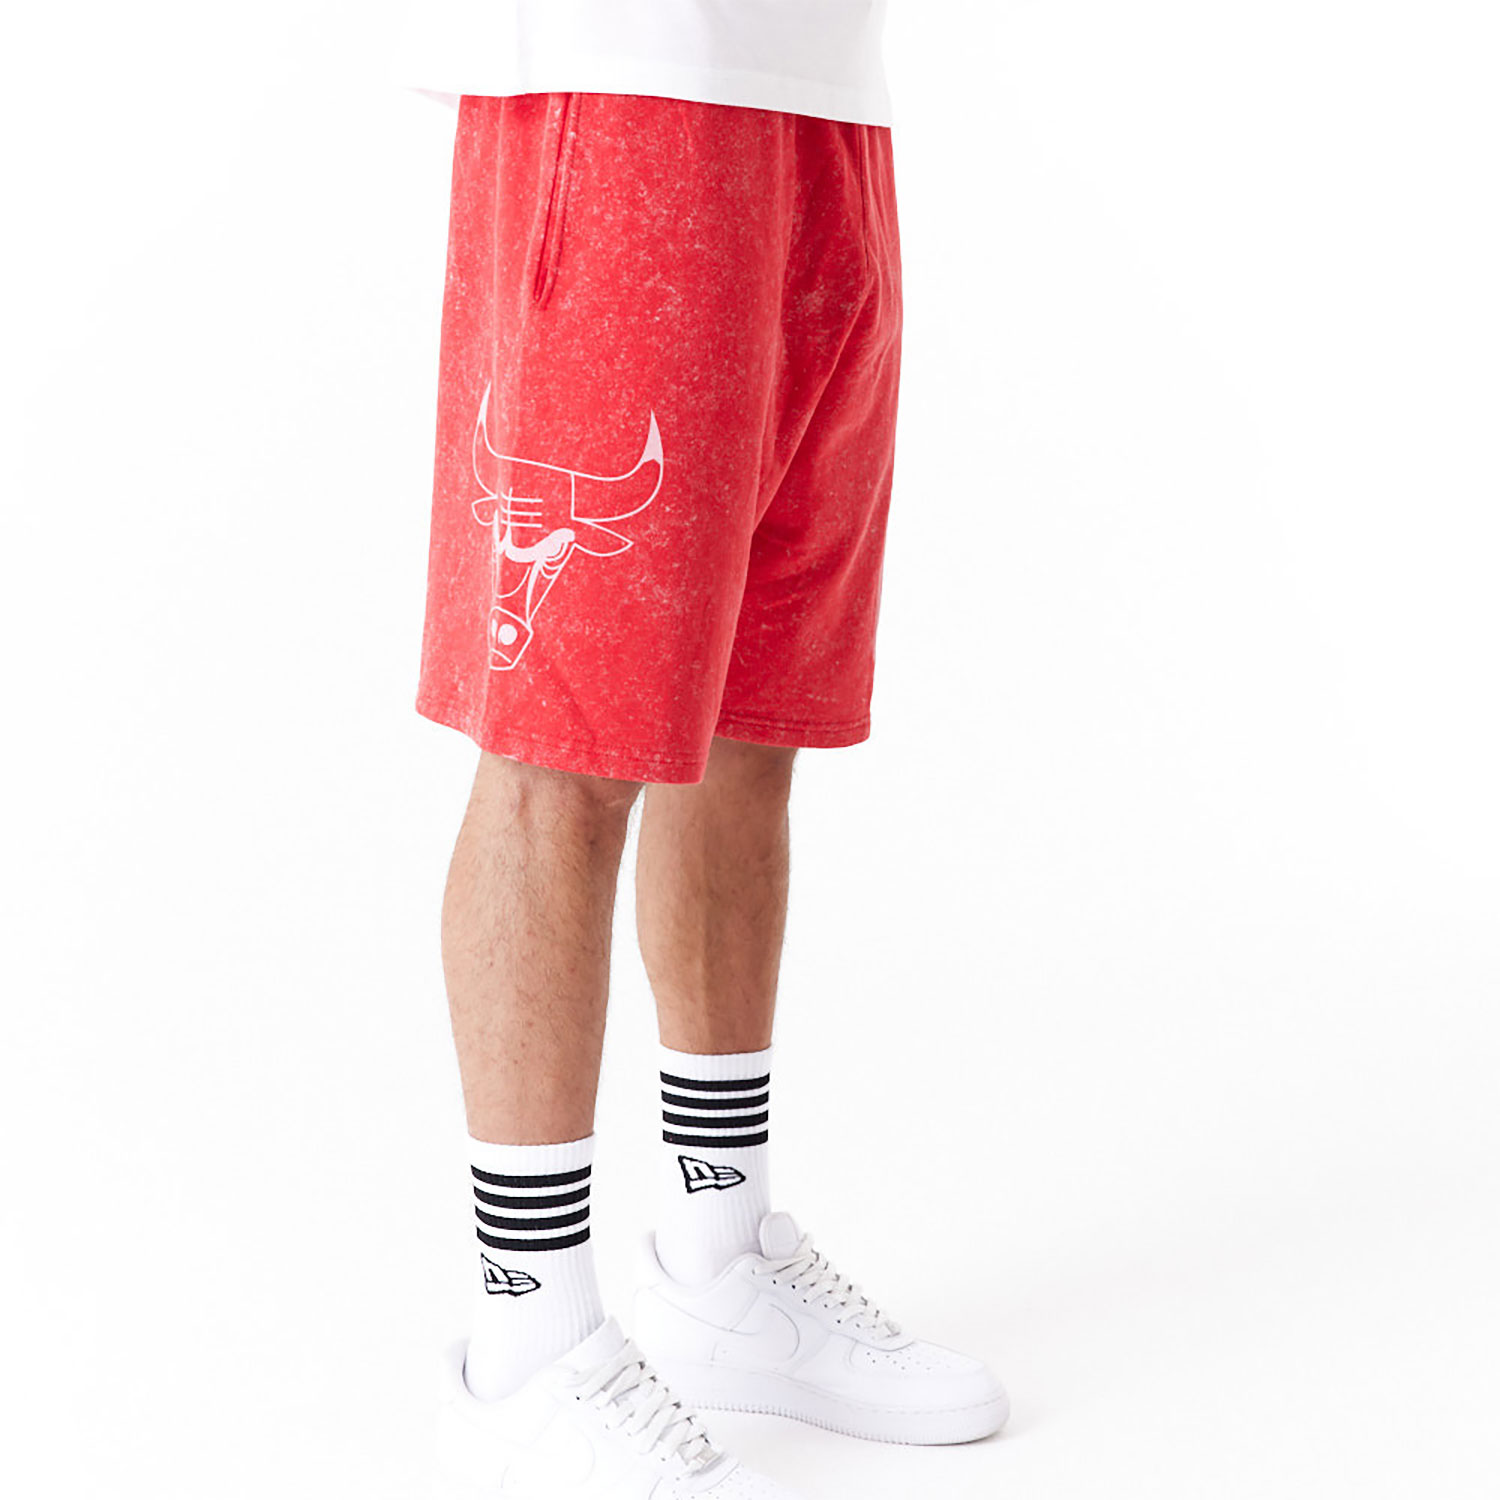 Chicago Bulls NBA Washed Red Shorts